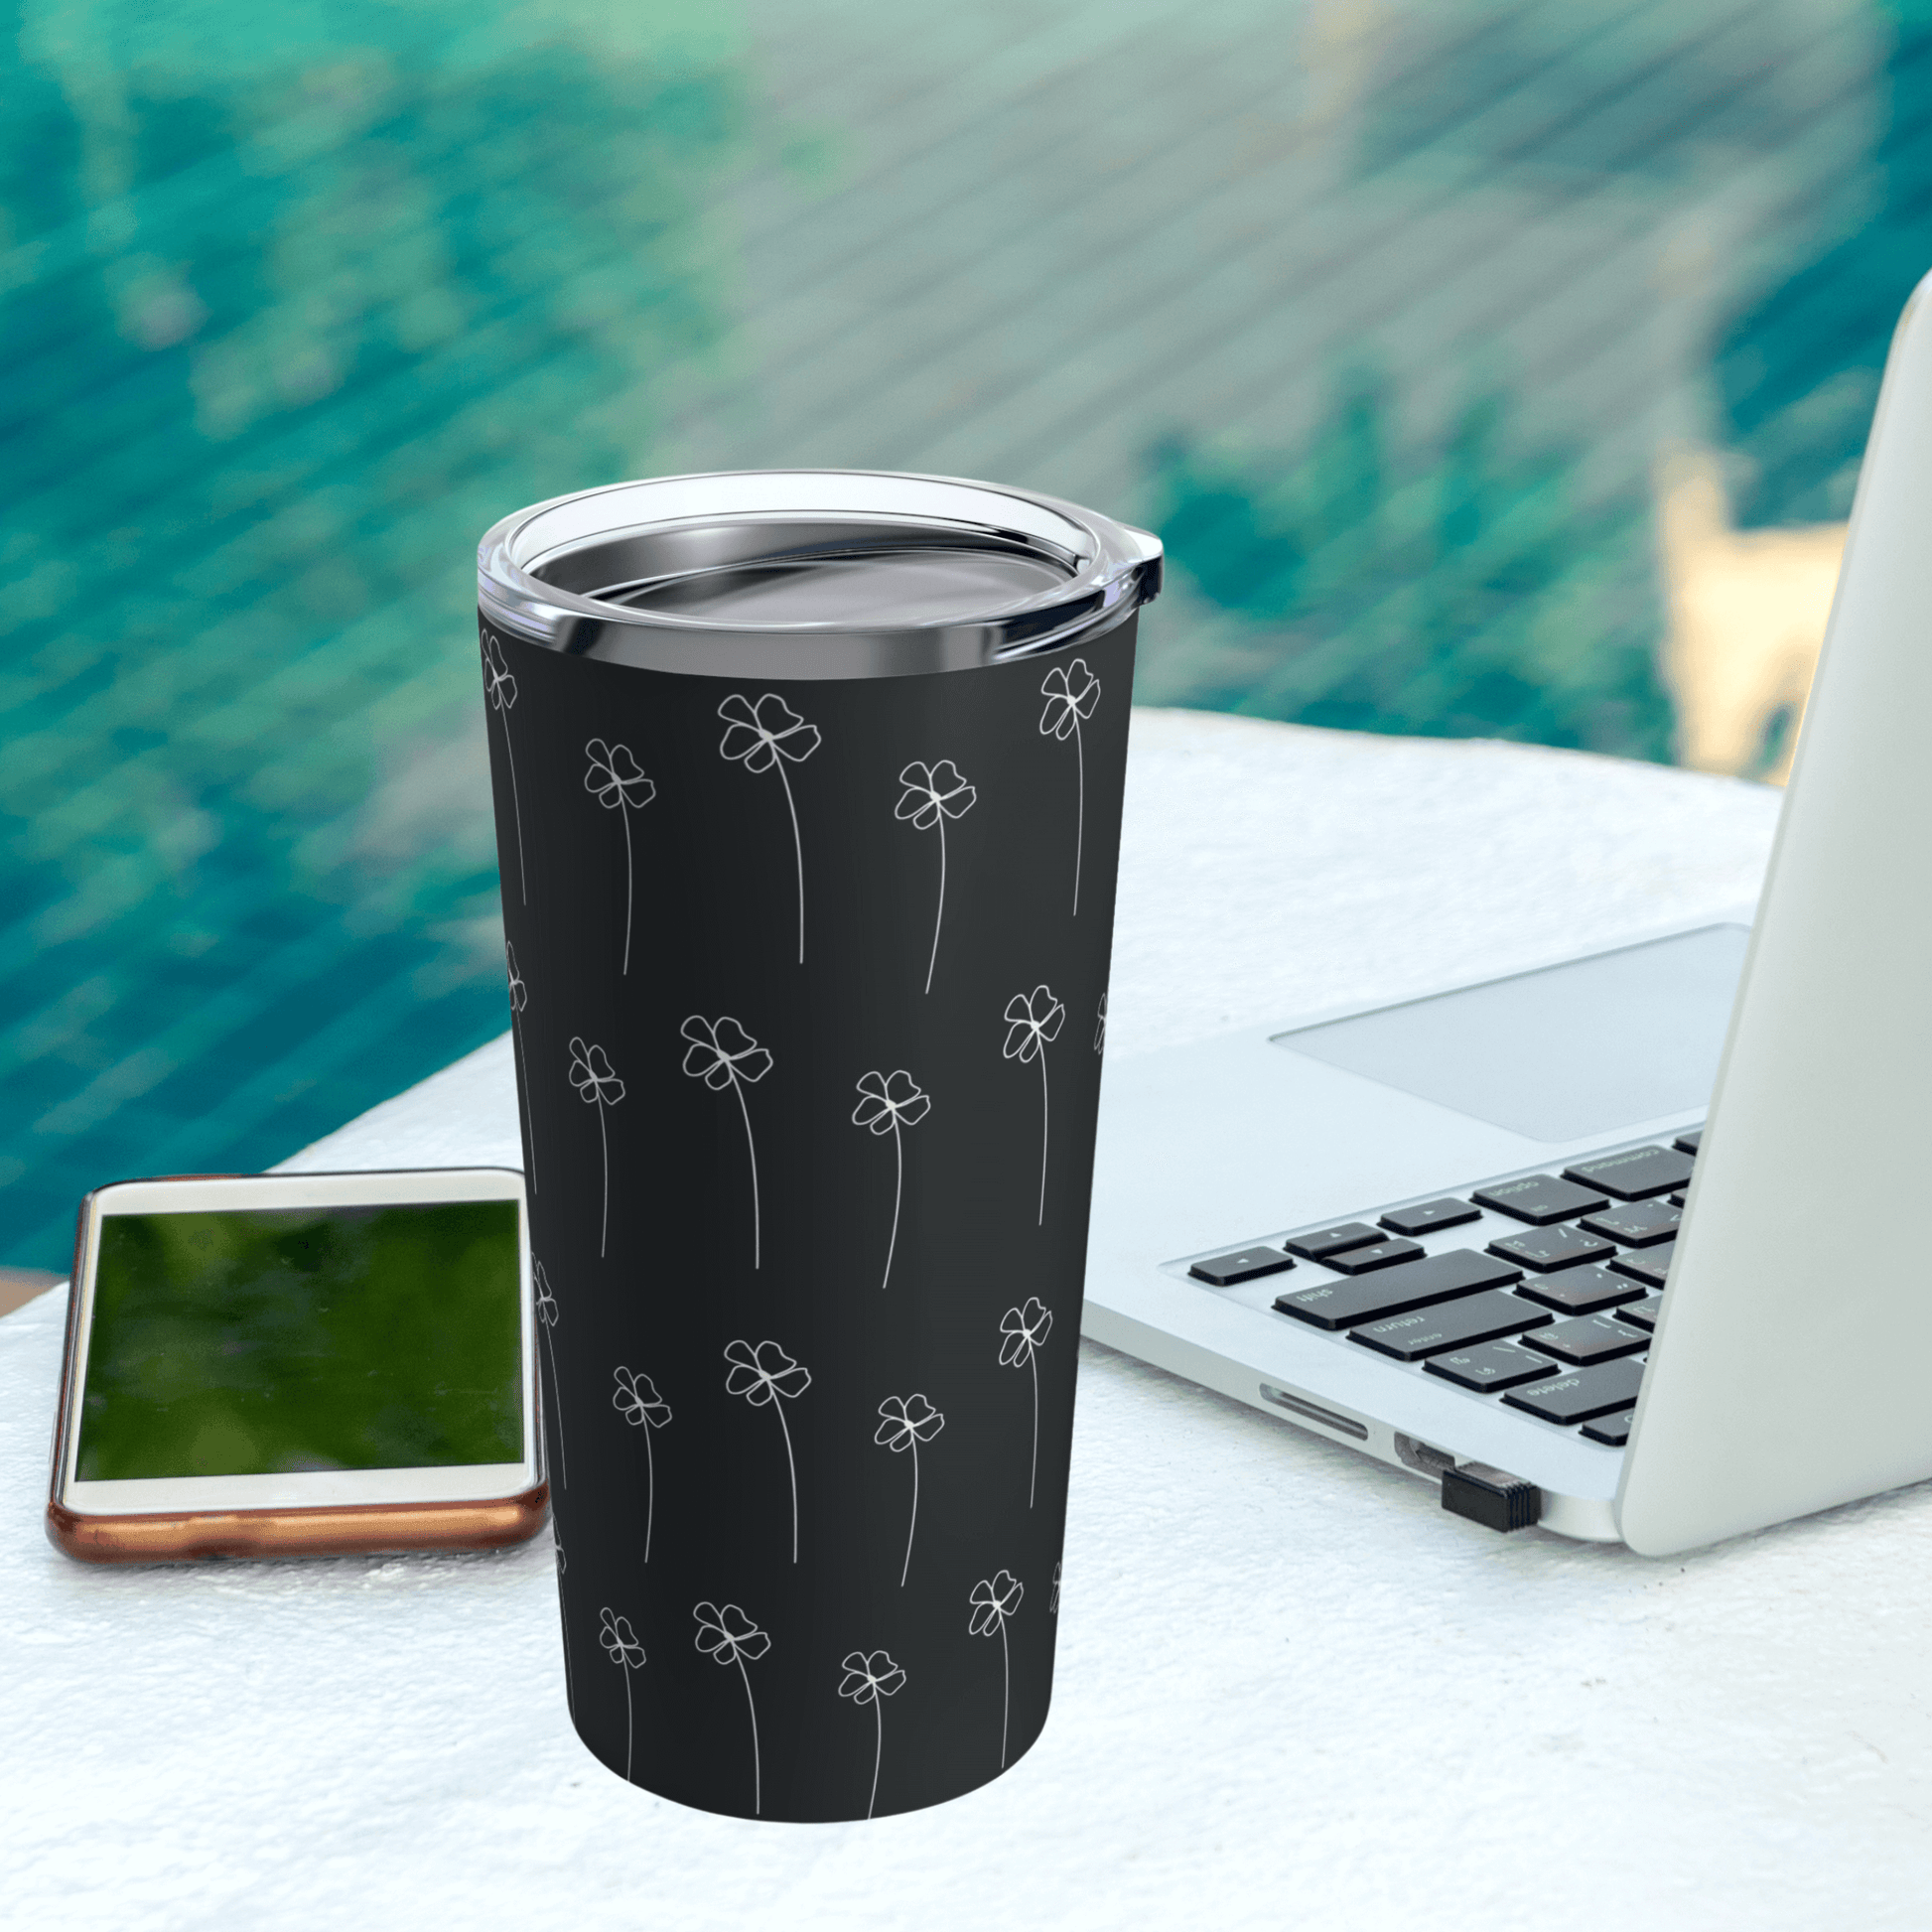 Our durable coffee travel mug looks great next to a computer by the pool to keep your drinks cold on a hot day.